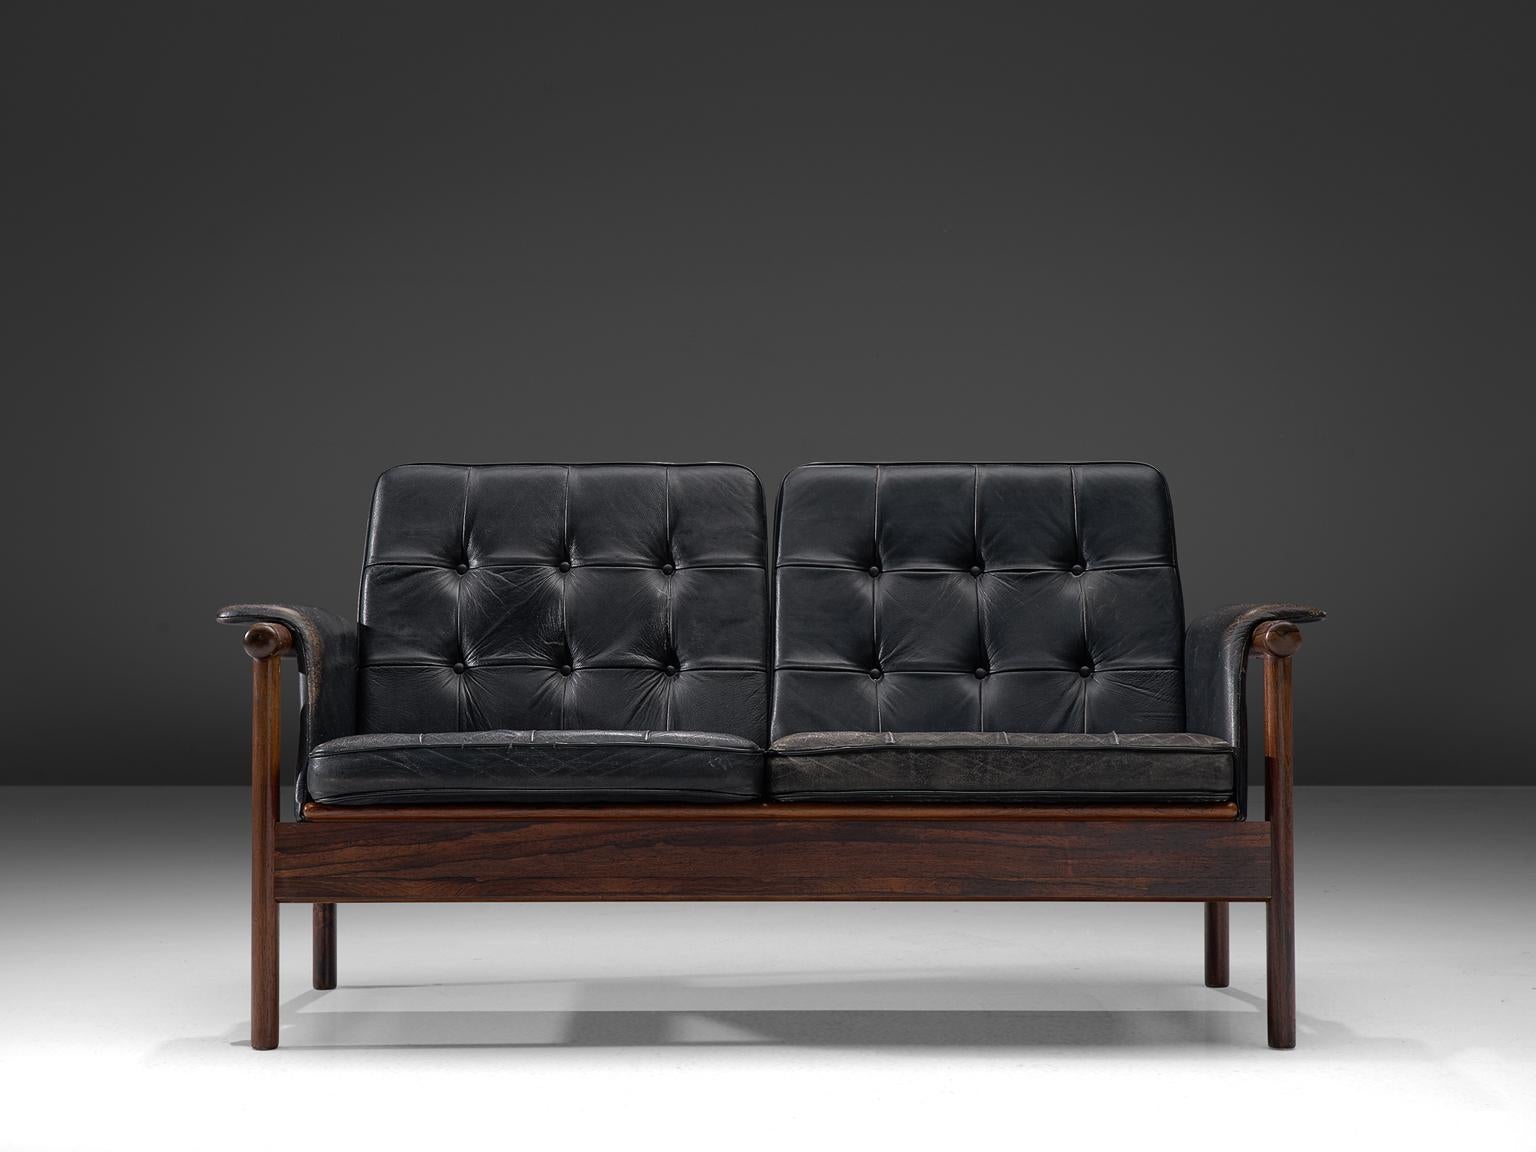 Karl-Erik Ekselius for JOC, sofa, leather and rosewood, Sweden, 1960s.

This sofa features a rosewood frame with slatted back and an angular, geometric frame. It features a tufted seat and back are comfortable and support the sitter. The backrest